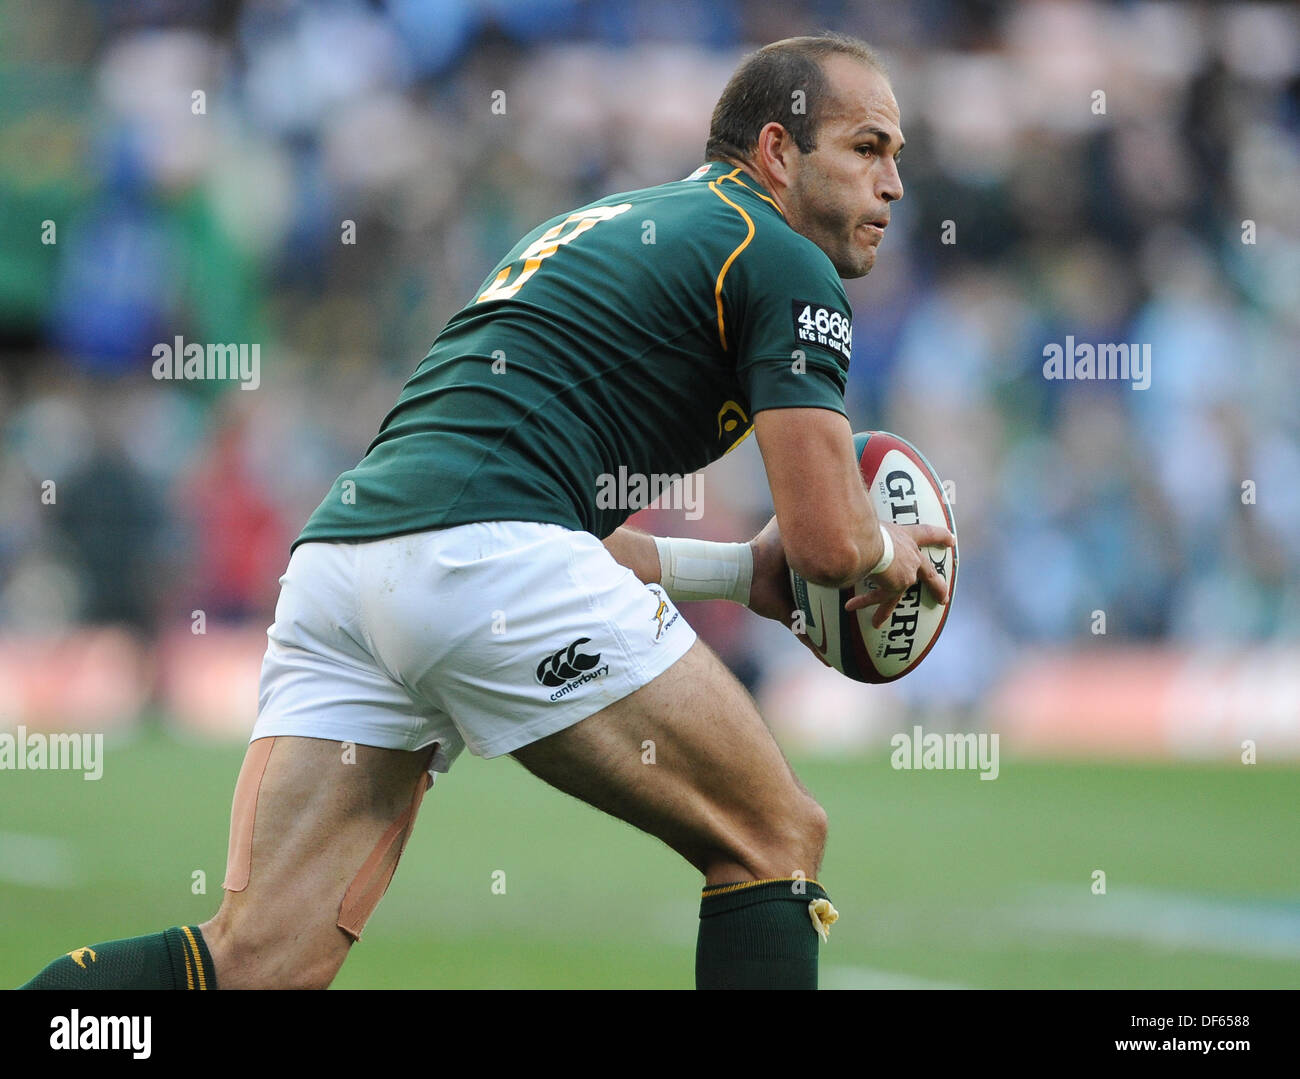 Cape Town, South Africa. 28 Sept 2013. , Fourie du Preez of South Africa  during the Castle Lager Rugby Championship test match between South Africa  (Sprinkboks) and Australia (Wallabies) at DHL Newlands